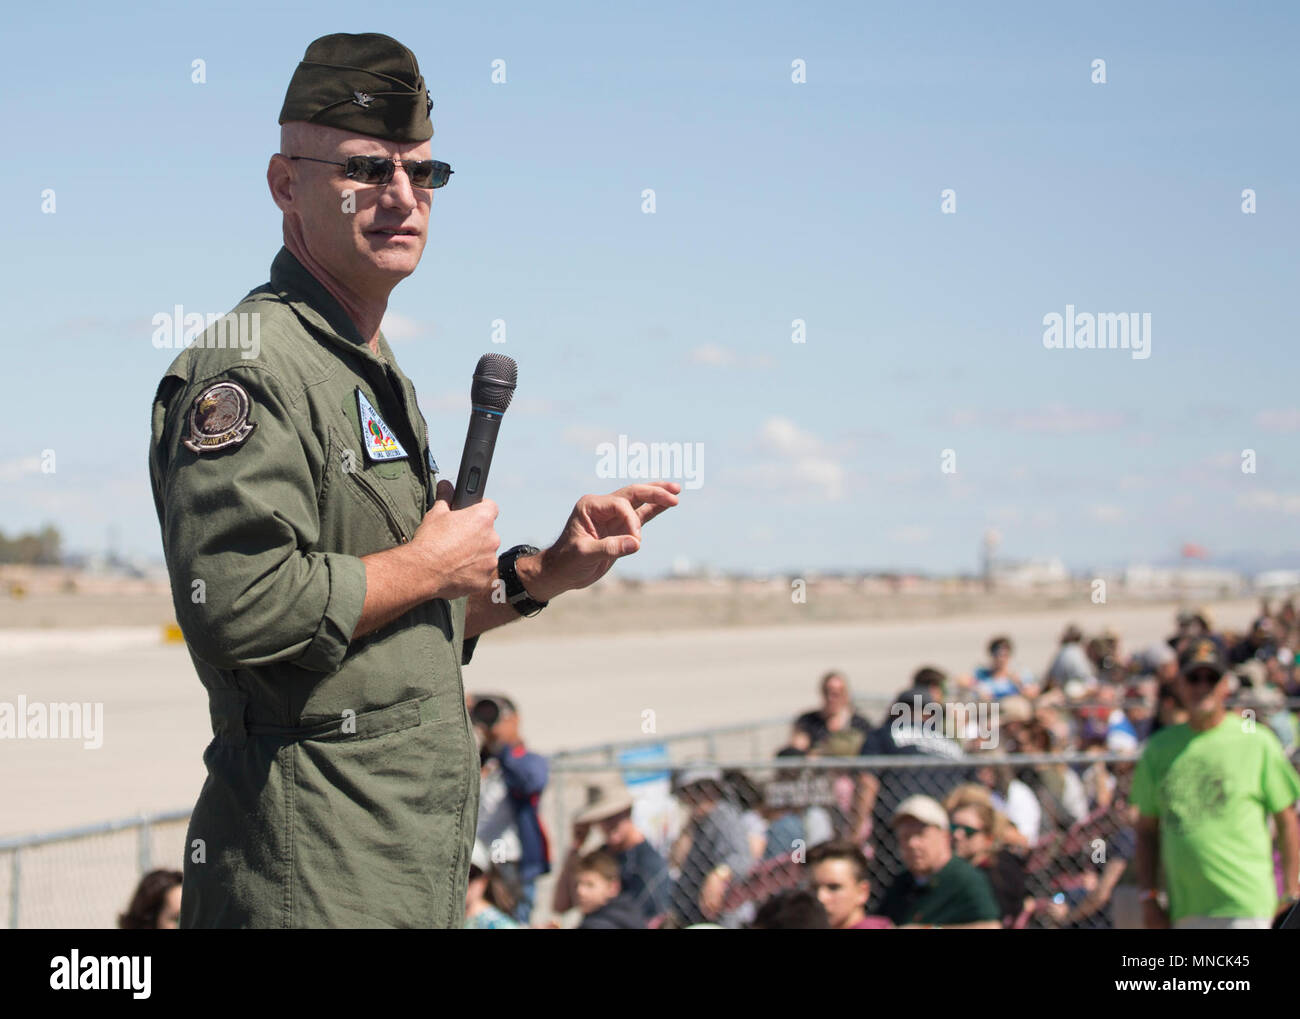 U.S. Marine Corps Col. David A. Suggs, the commanding officer of Marine Corps Air Station Yuma, Ariz., speaks to guests at the 2018 Yuma Airshow Saturday, March 17, 2018. The airshow is MCAS Yuma's only military airshow of the year and provides the community an opportunity to see thrilling aerial and ground performers for free while interacting with Marines and Sailors. (U.S. Marine Corps Stock Photo